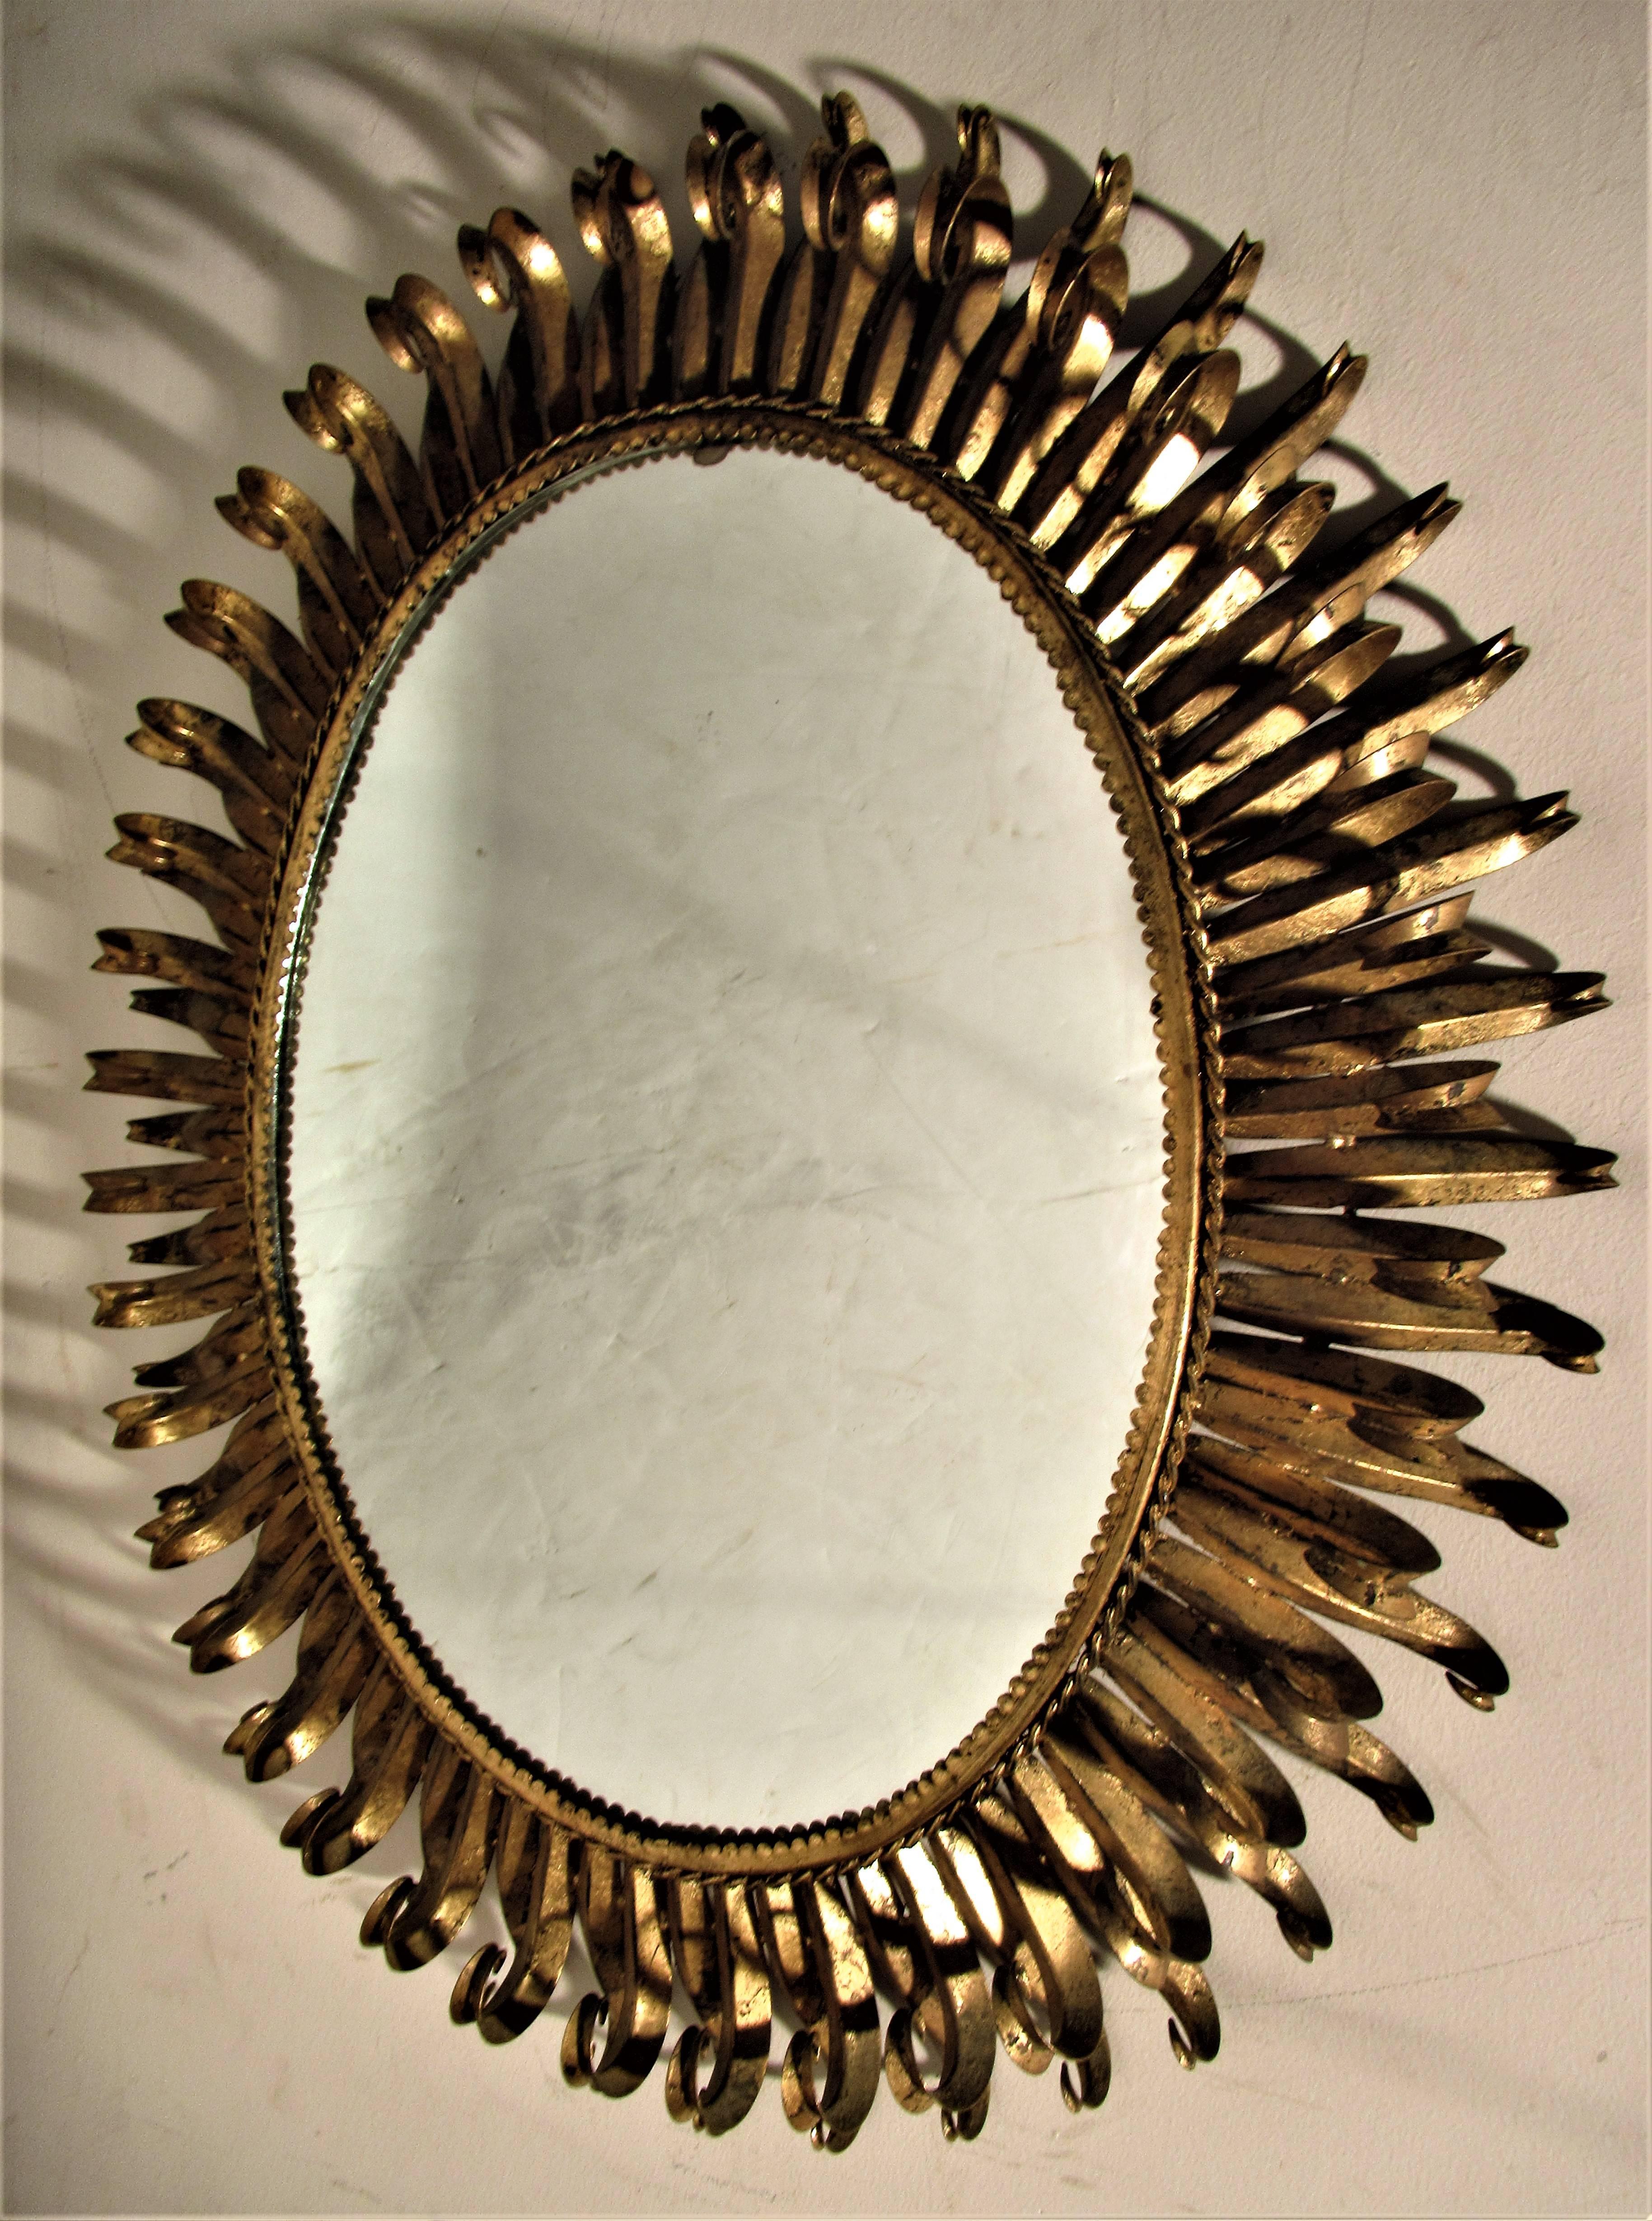 A larger than usual size oval gilt metal eyelash mirror in beautifully aged all original gilded surface. Spanish, circa 1960.